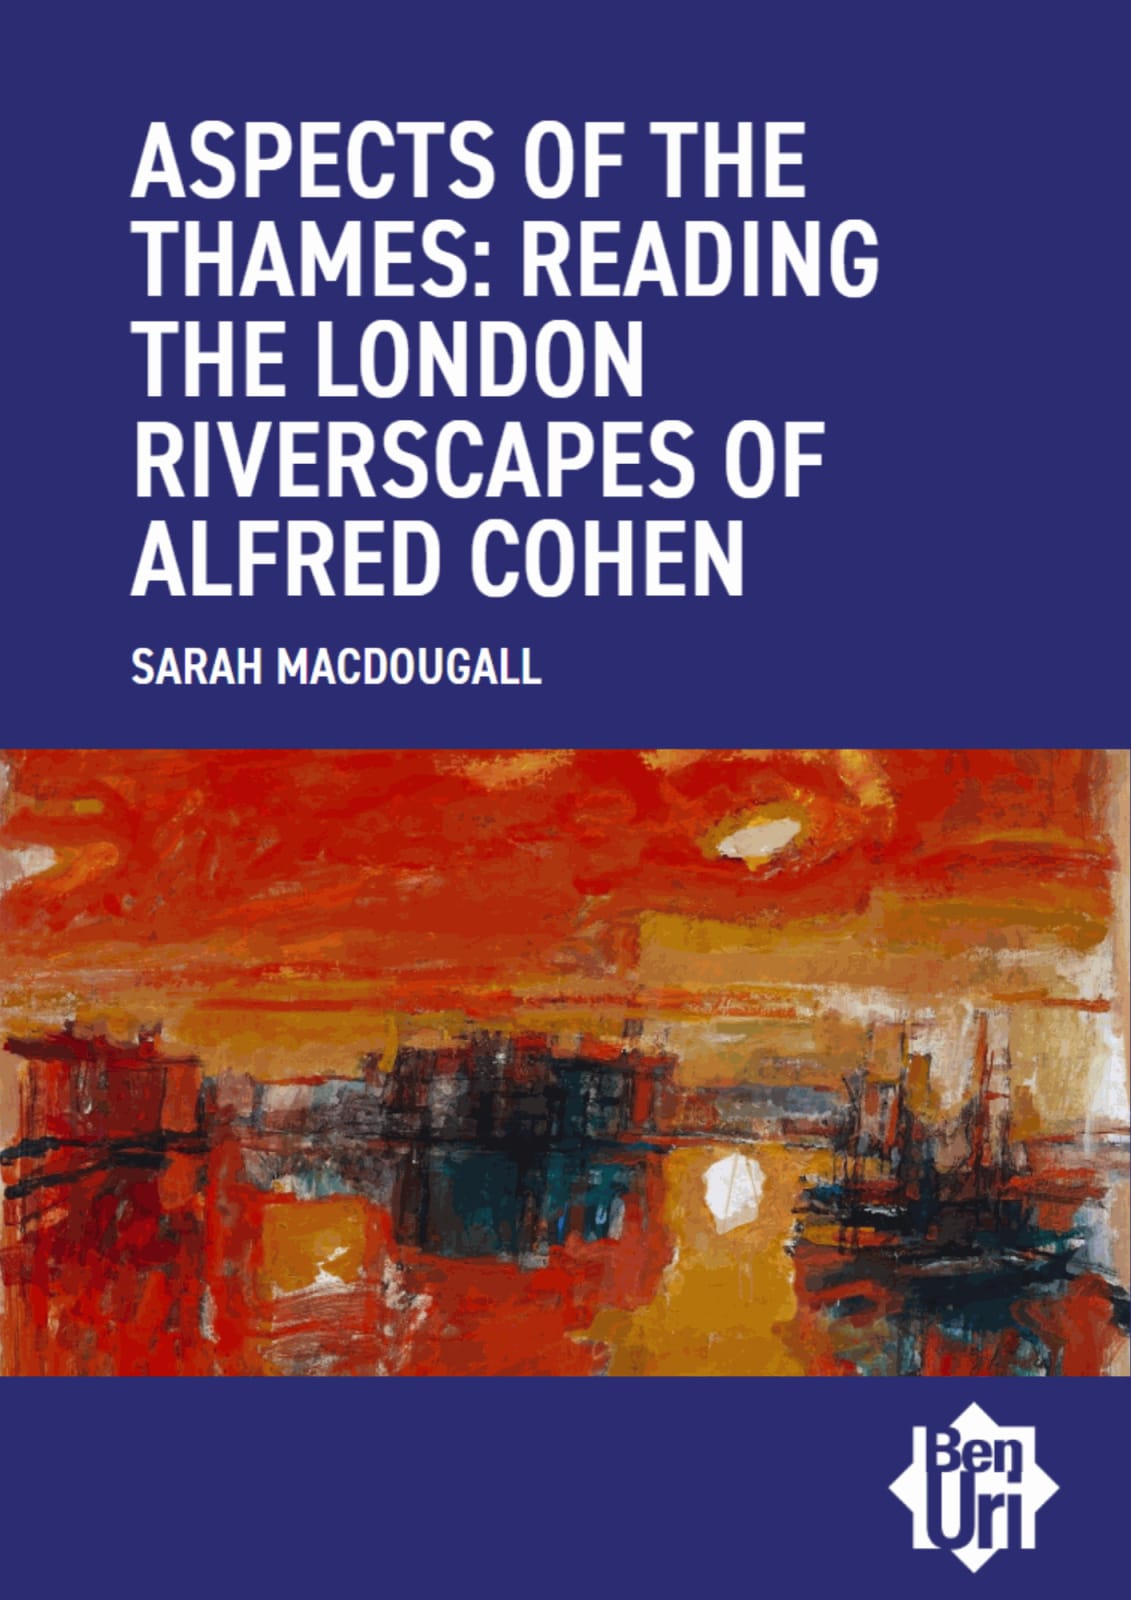 Aspects of the Thames: Alfred Cohen by Sarah MacDougall Read it here